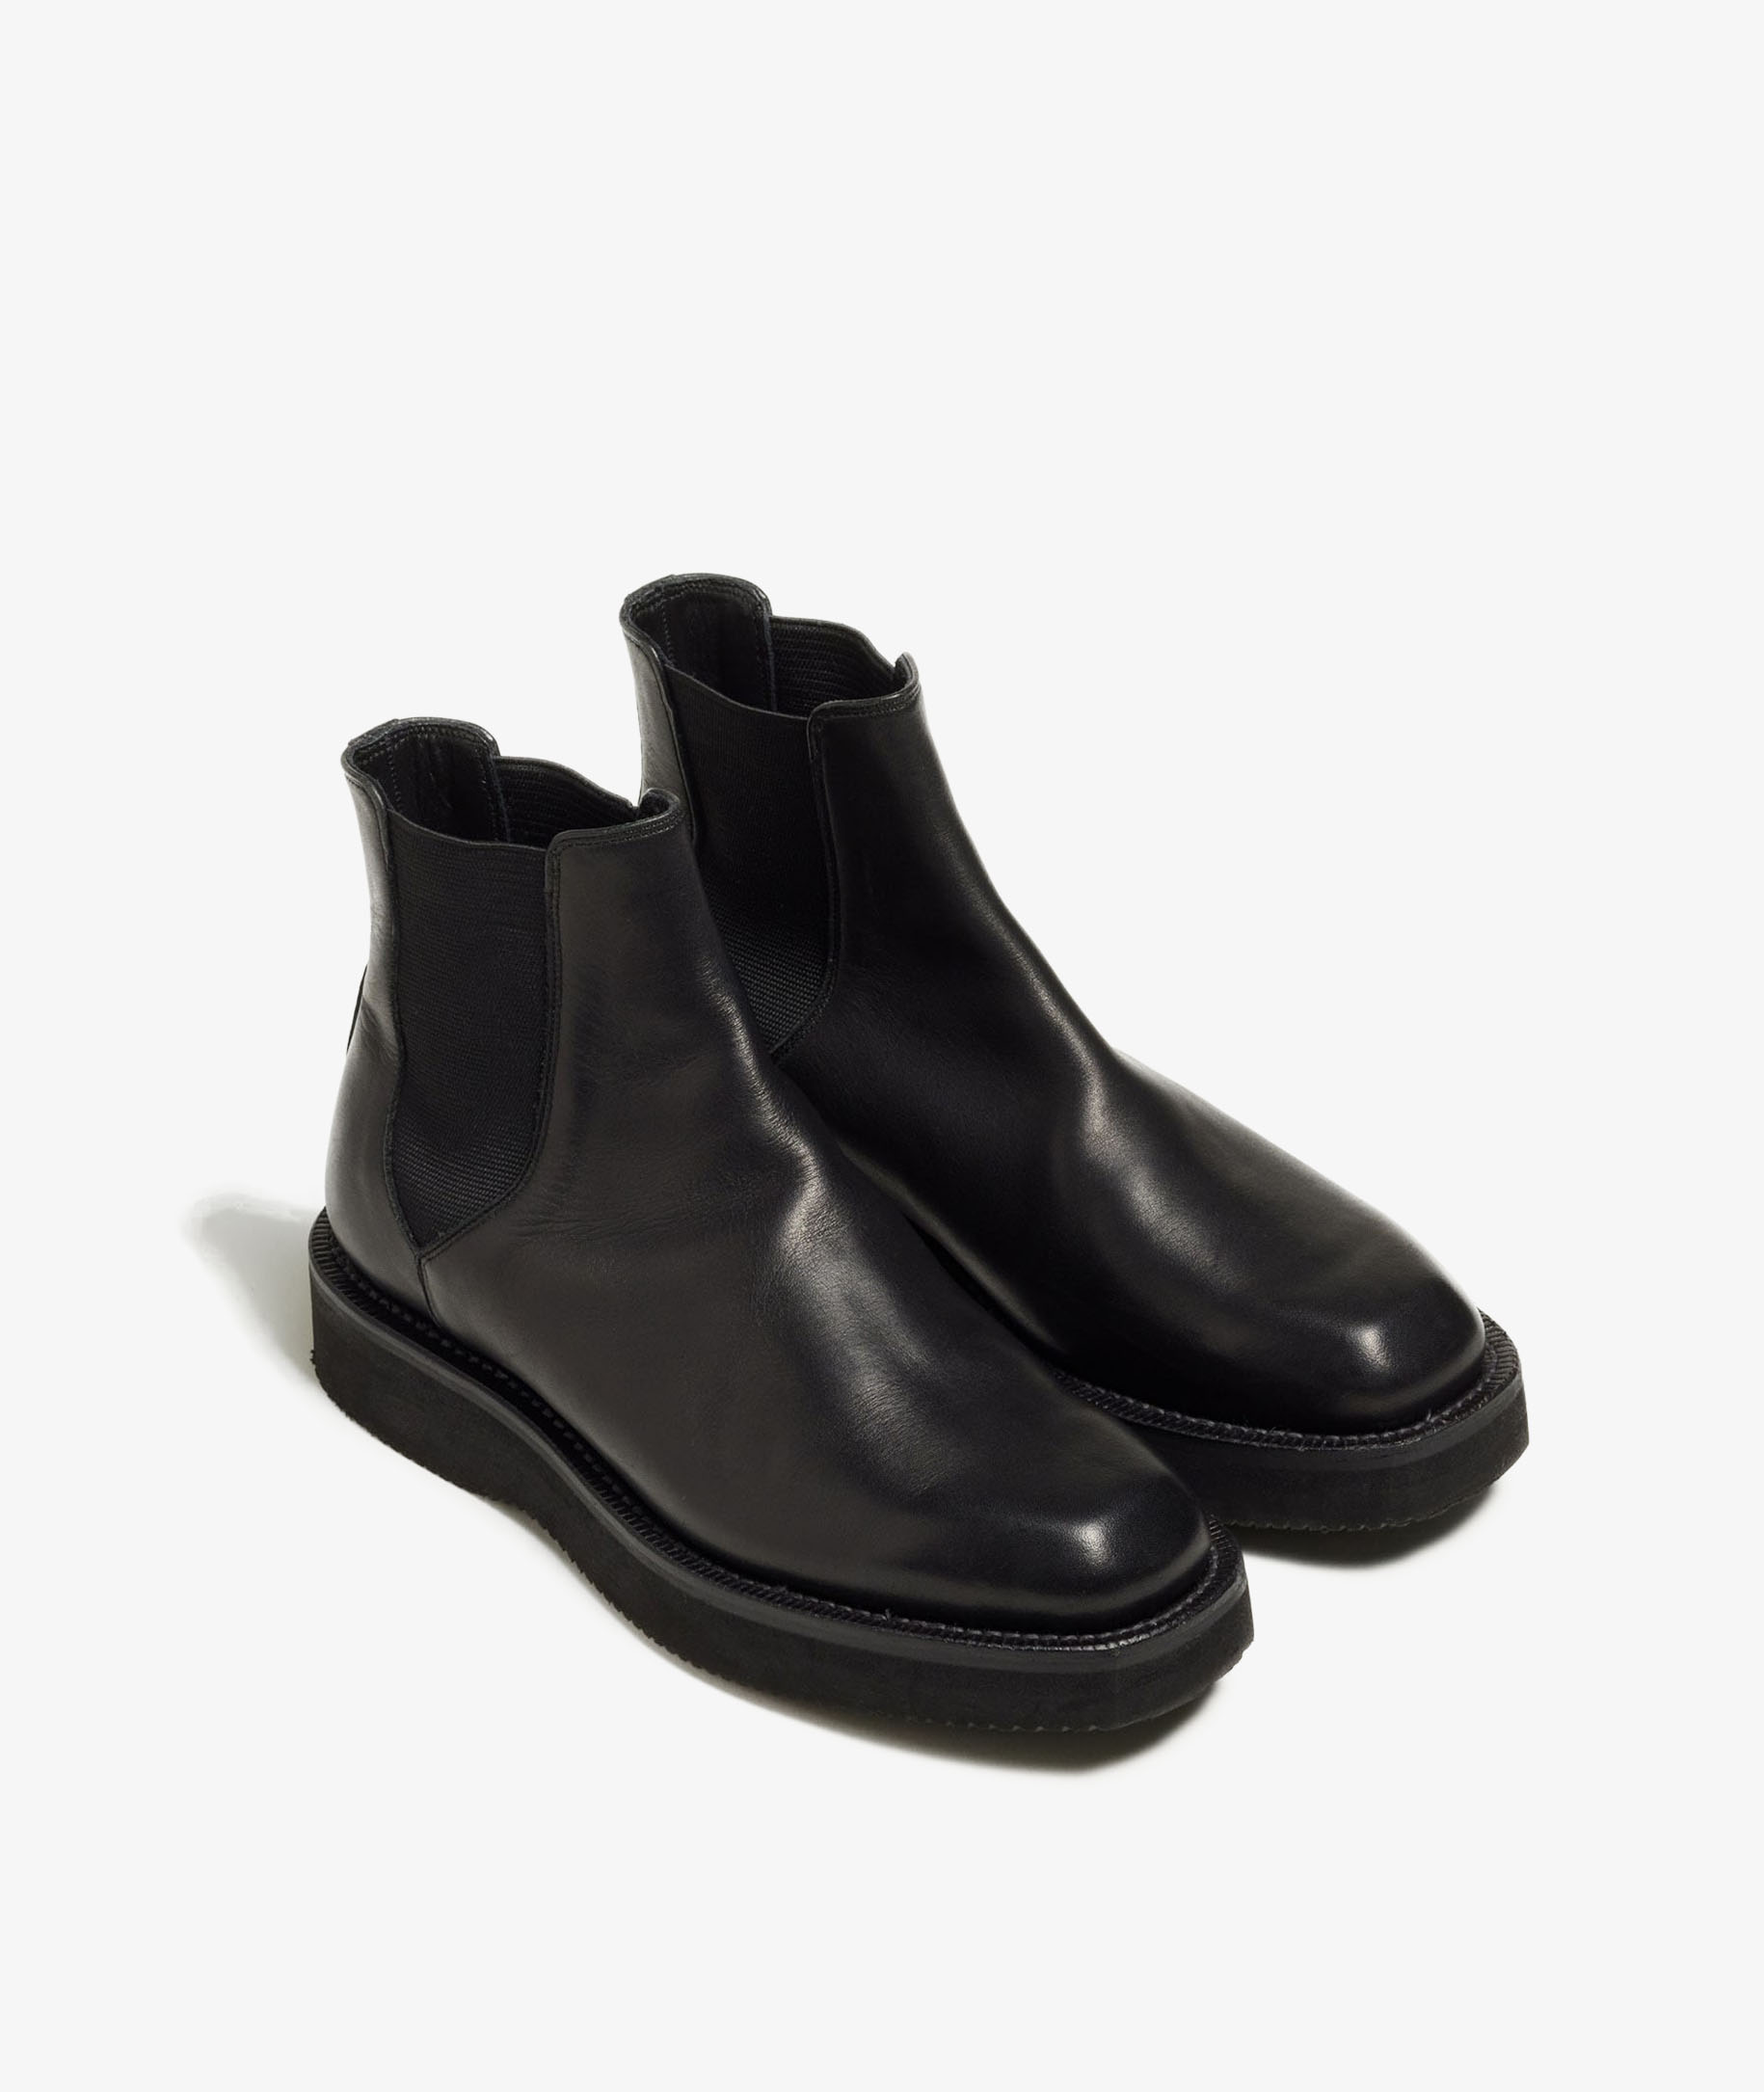 Norse Store | Shipping Worldwide - Auralee LEATHER SQUARE BOOTS MADE BY ...